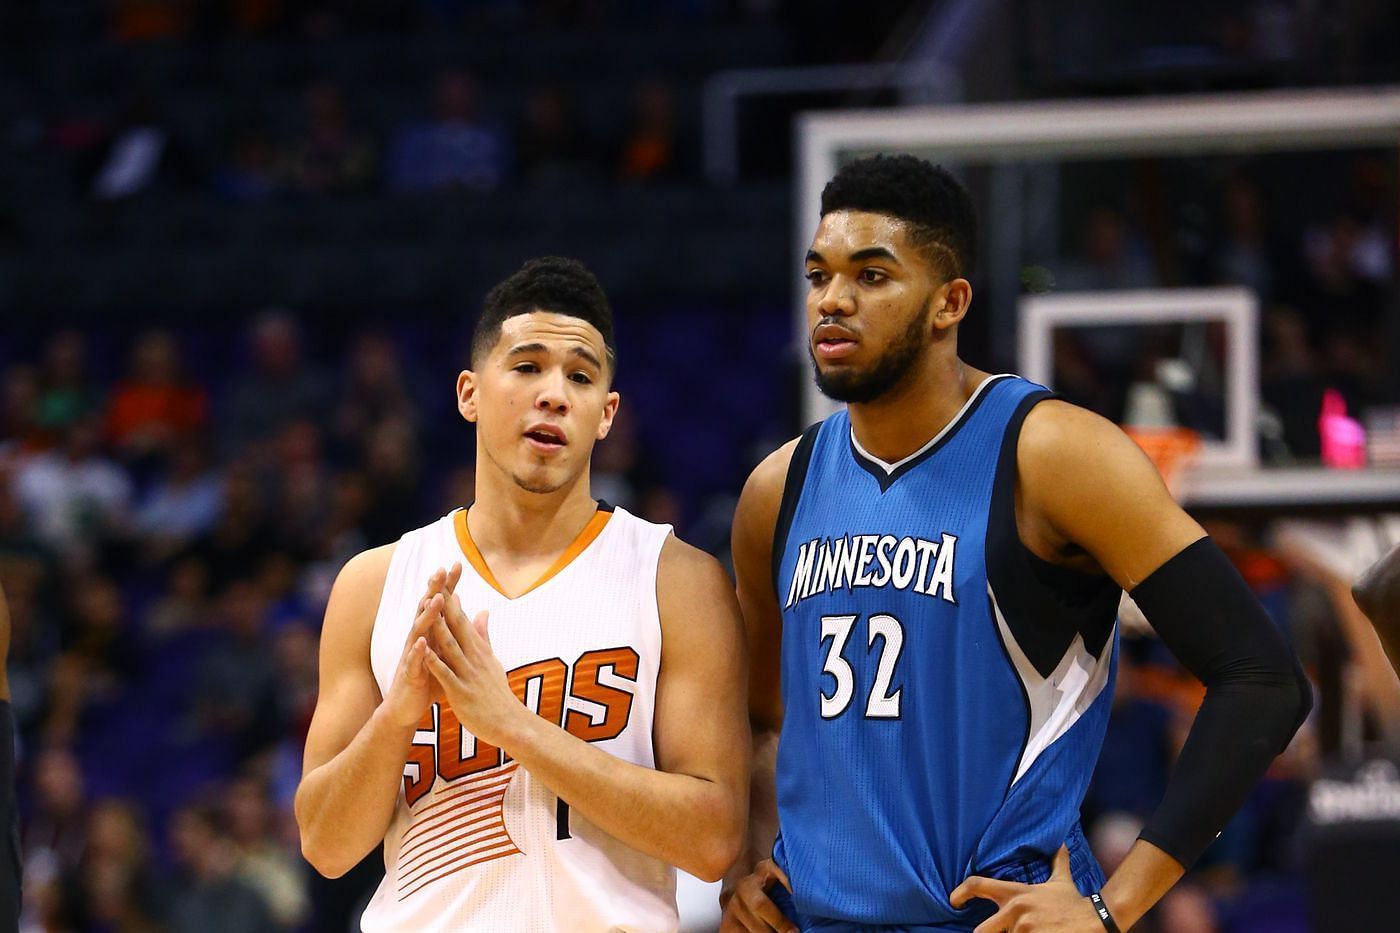 Devin Booker and Karl-Anthony Towns (Photo: SB Nation)